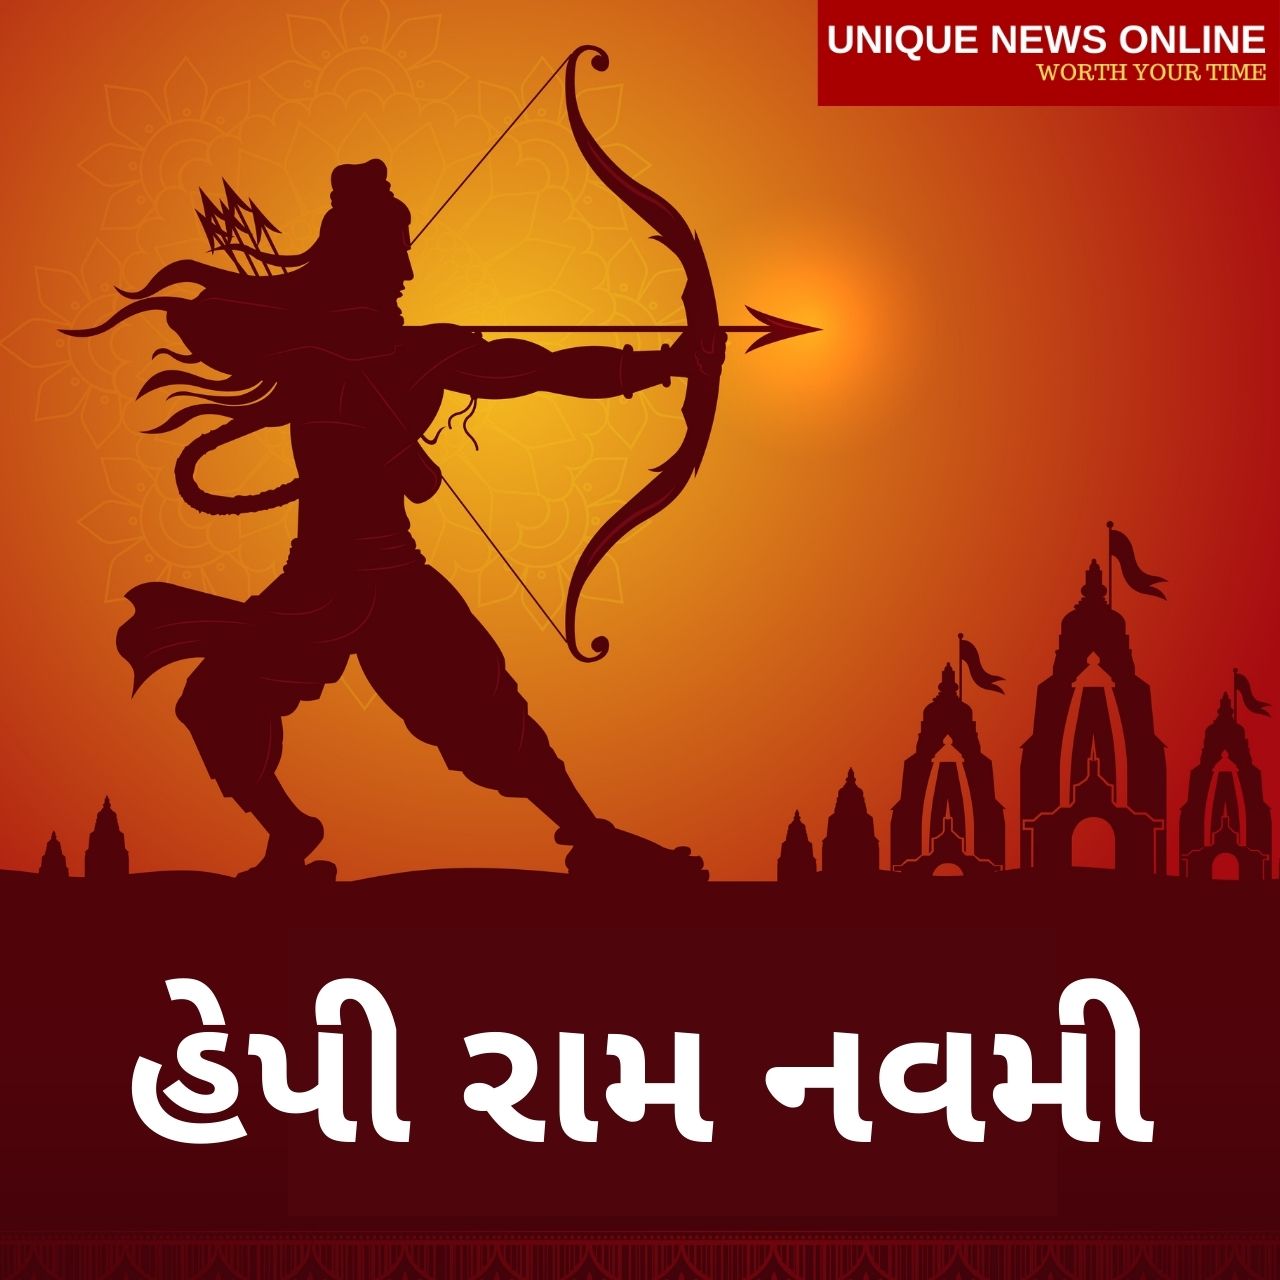 Happy Ram Navami 2021 Wishes in Gujarati, Images, Greetings, Quotes, and Messages to Share